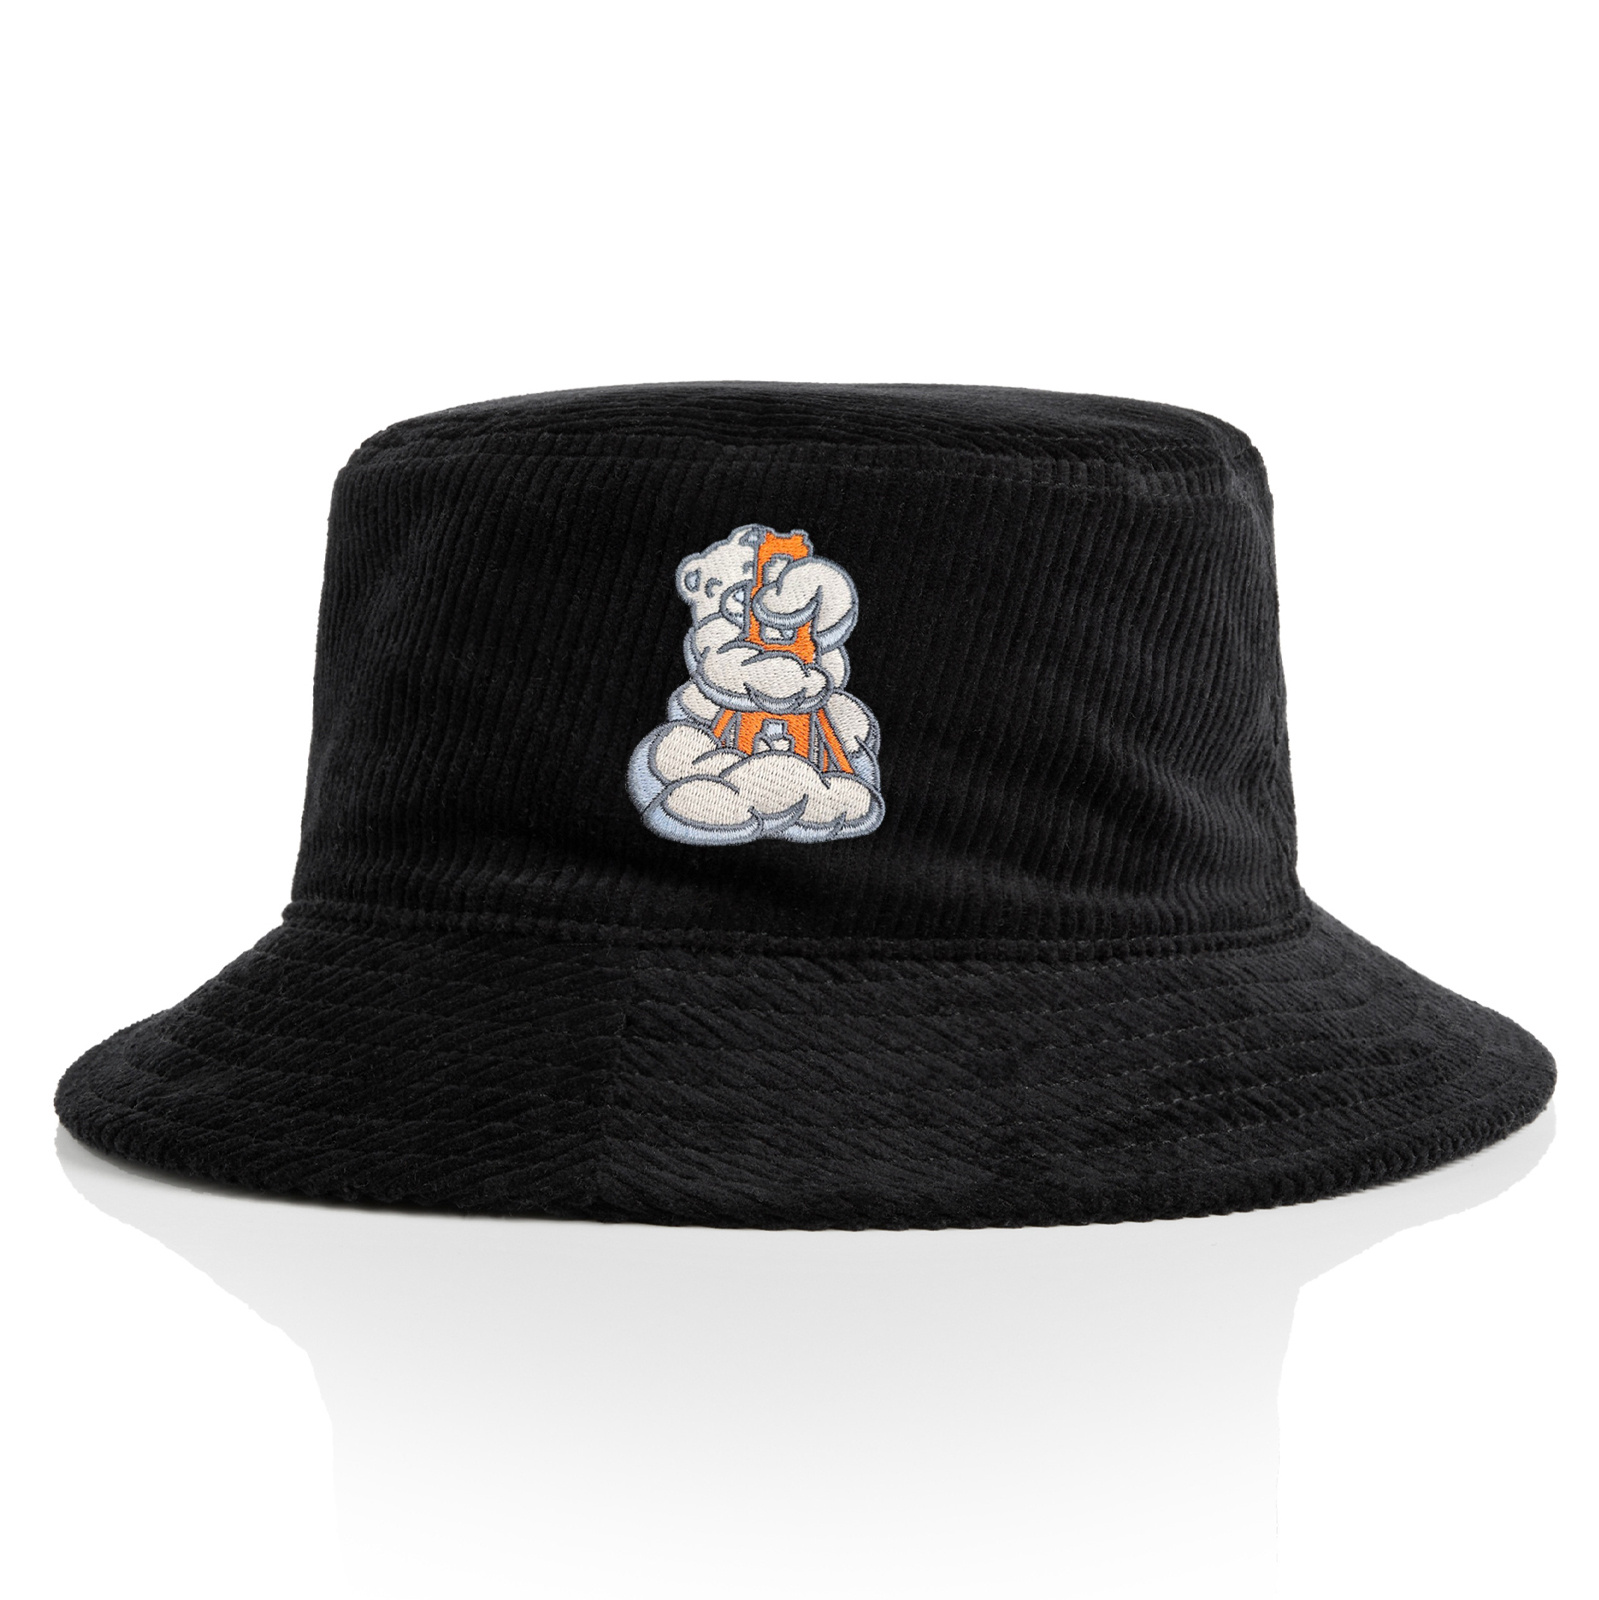 Bucket Hat, Black Corduroy, Embroidered with Karl the Fog